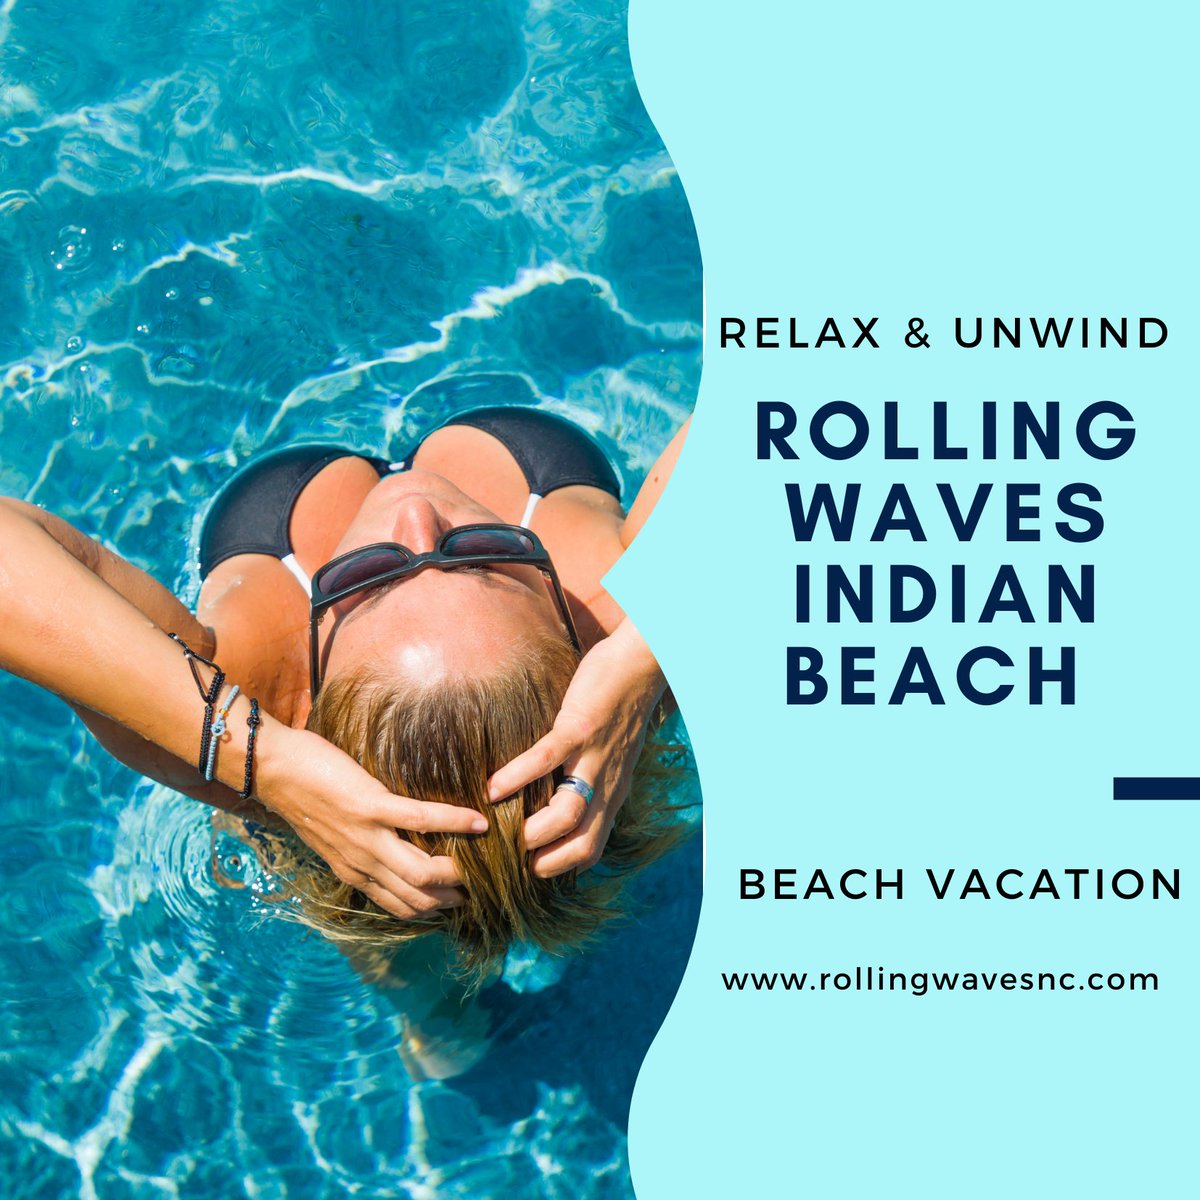 Indian Beach sets the stage for family fun and relaxation with diving spots, surf and paddleboarding, fishing and a boater’s paradise of waterways. rollingwavesnc.com #vacation #vacay #vacationmode #carolinabeach #relaxtime #oceanfrontcondo #beachfrontcondo #beachfrontrental